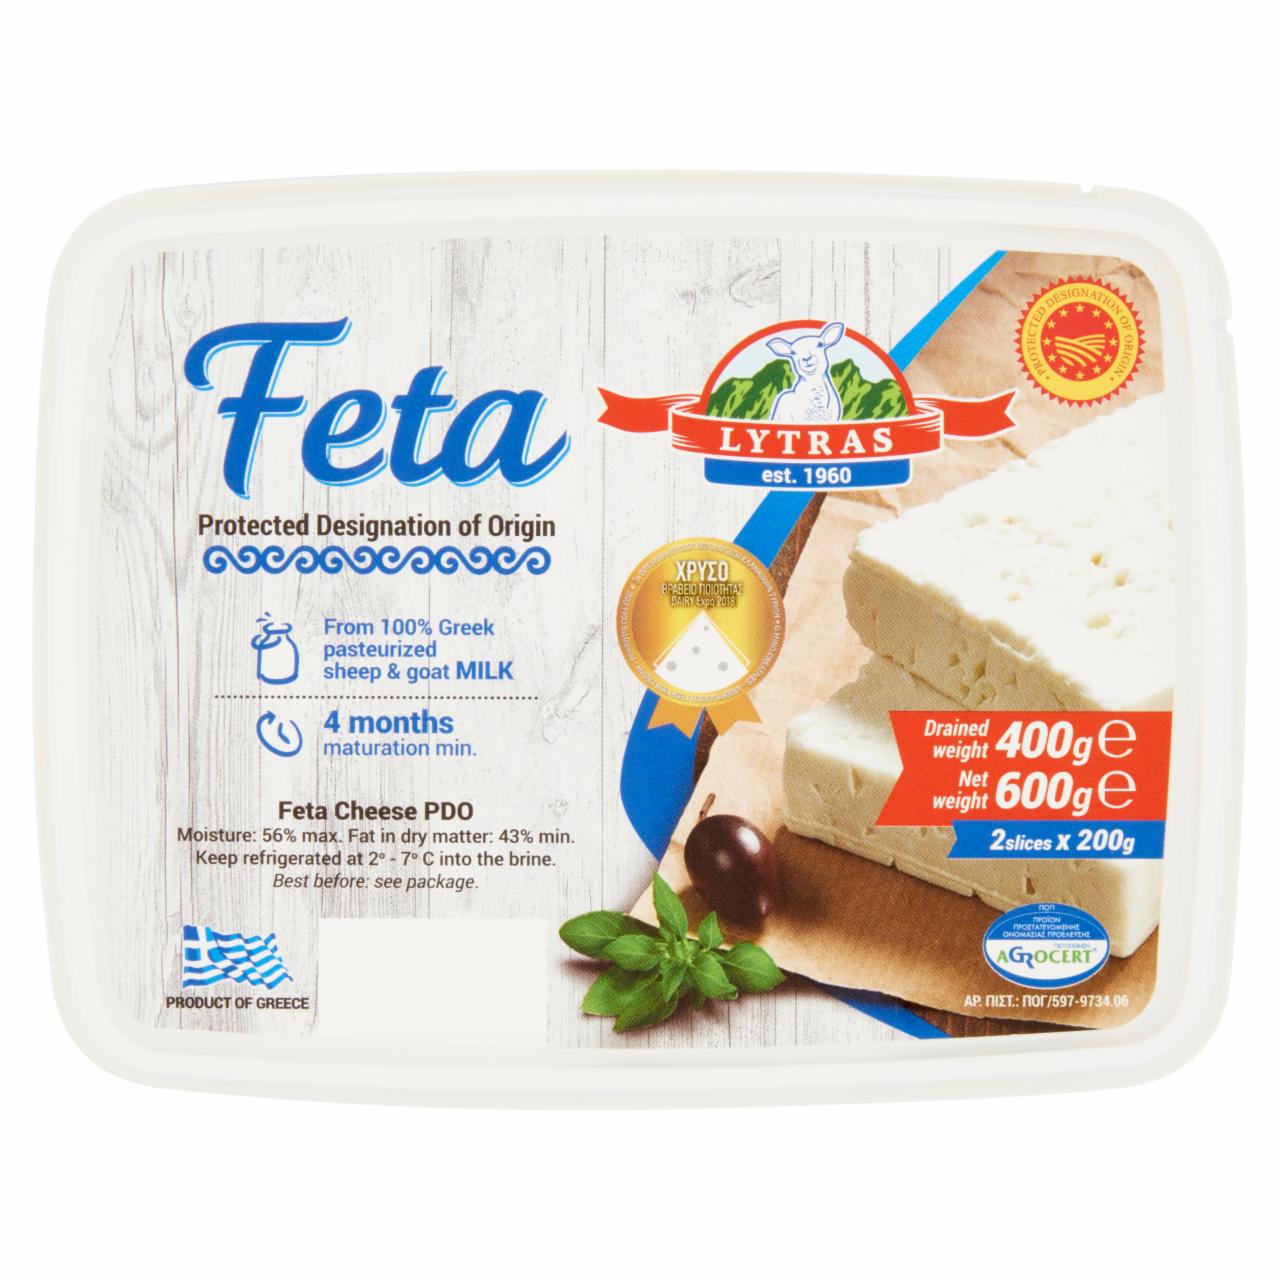 Photo - Lytras Feta Cheese from 100% Greek Pasteurized Sheep & Goat Milk 400 g